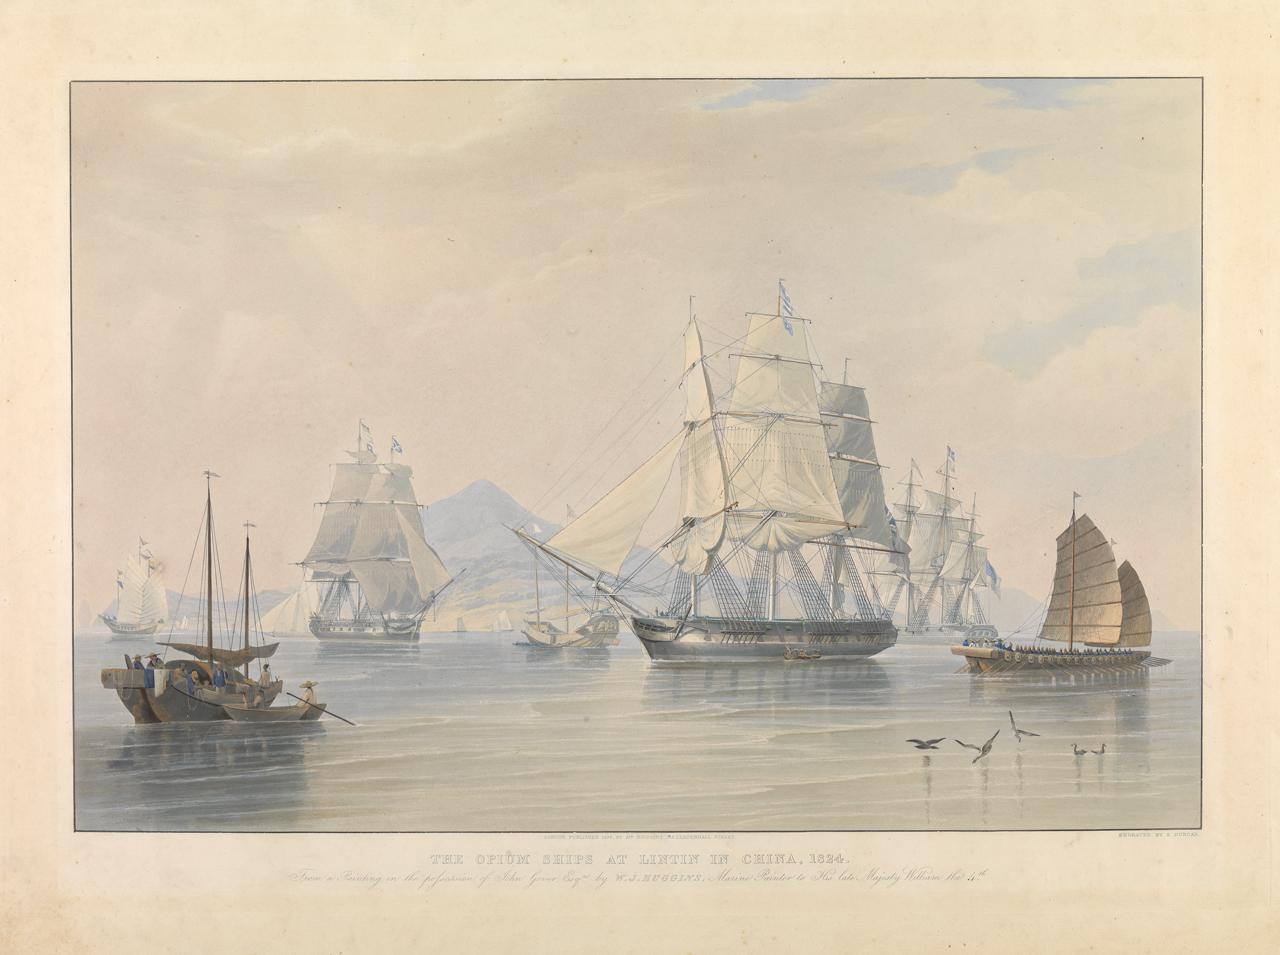 Historic print of sailing ships in China, identified as 'opium ships' in the caption